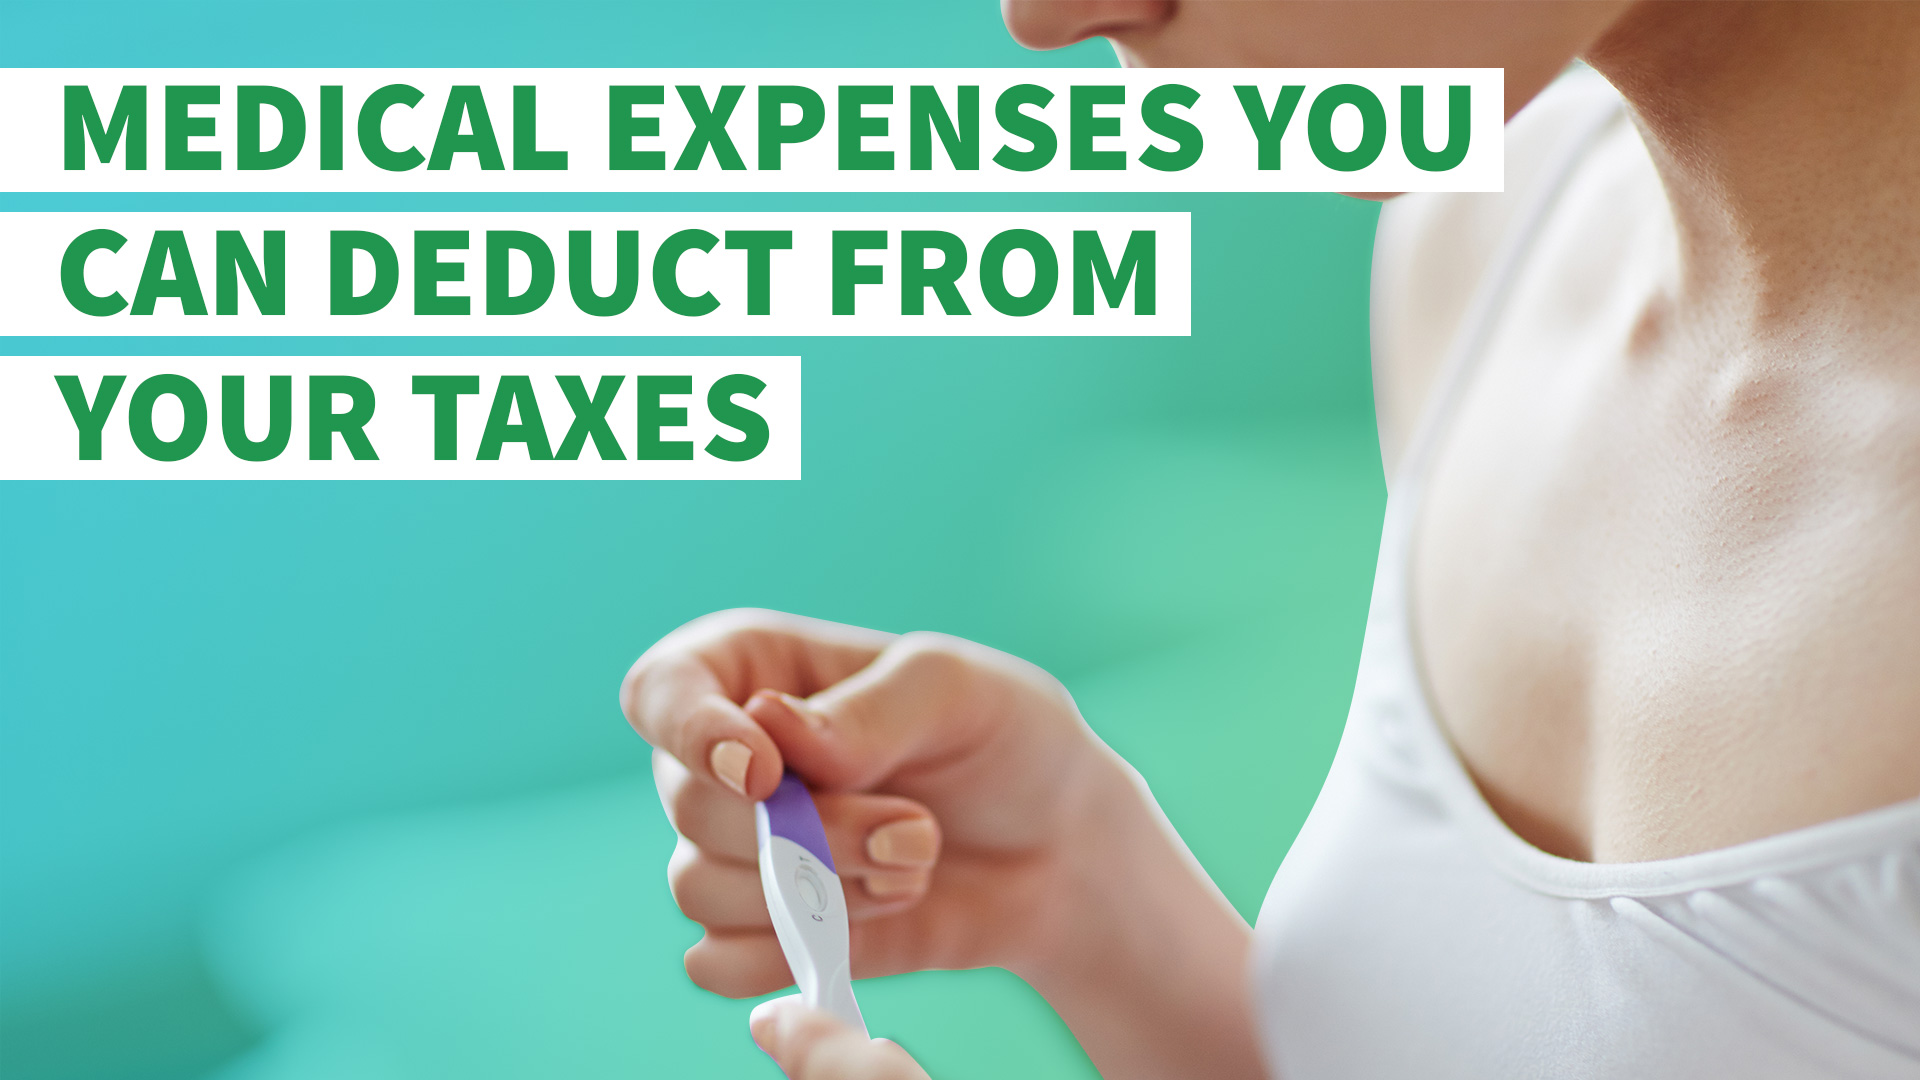 19-medical-expenses-you-can-deduct-from-your-taxes-gobankingrates